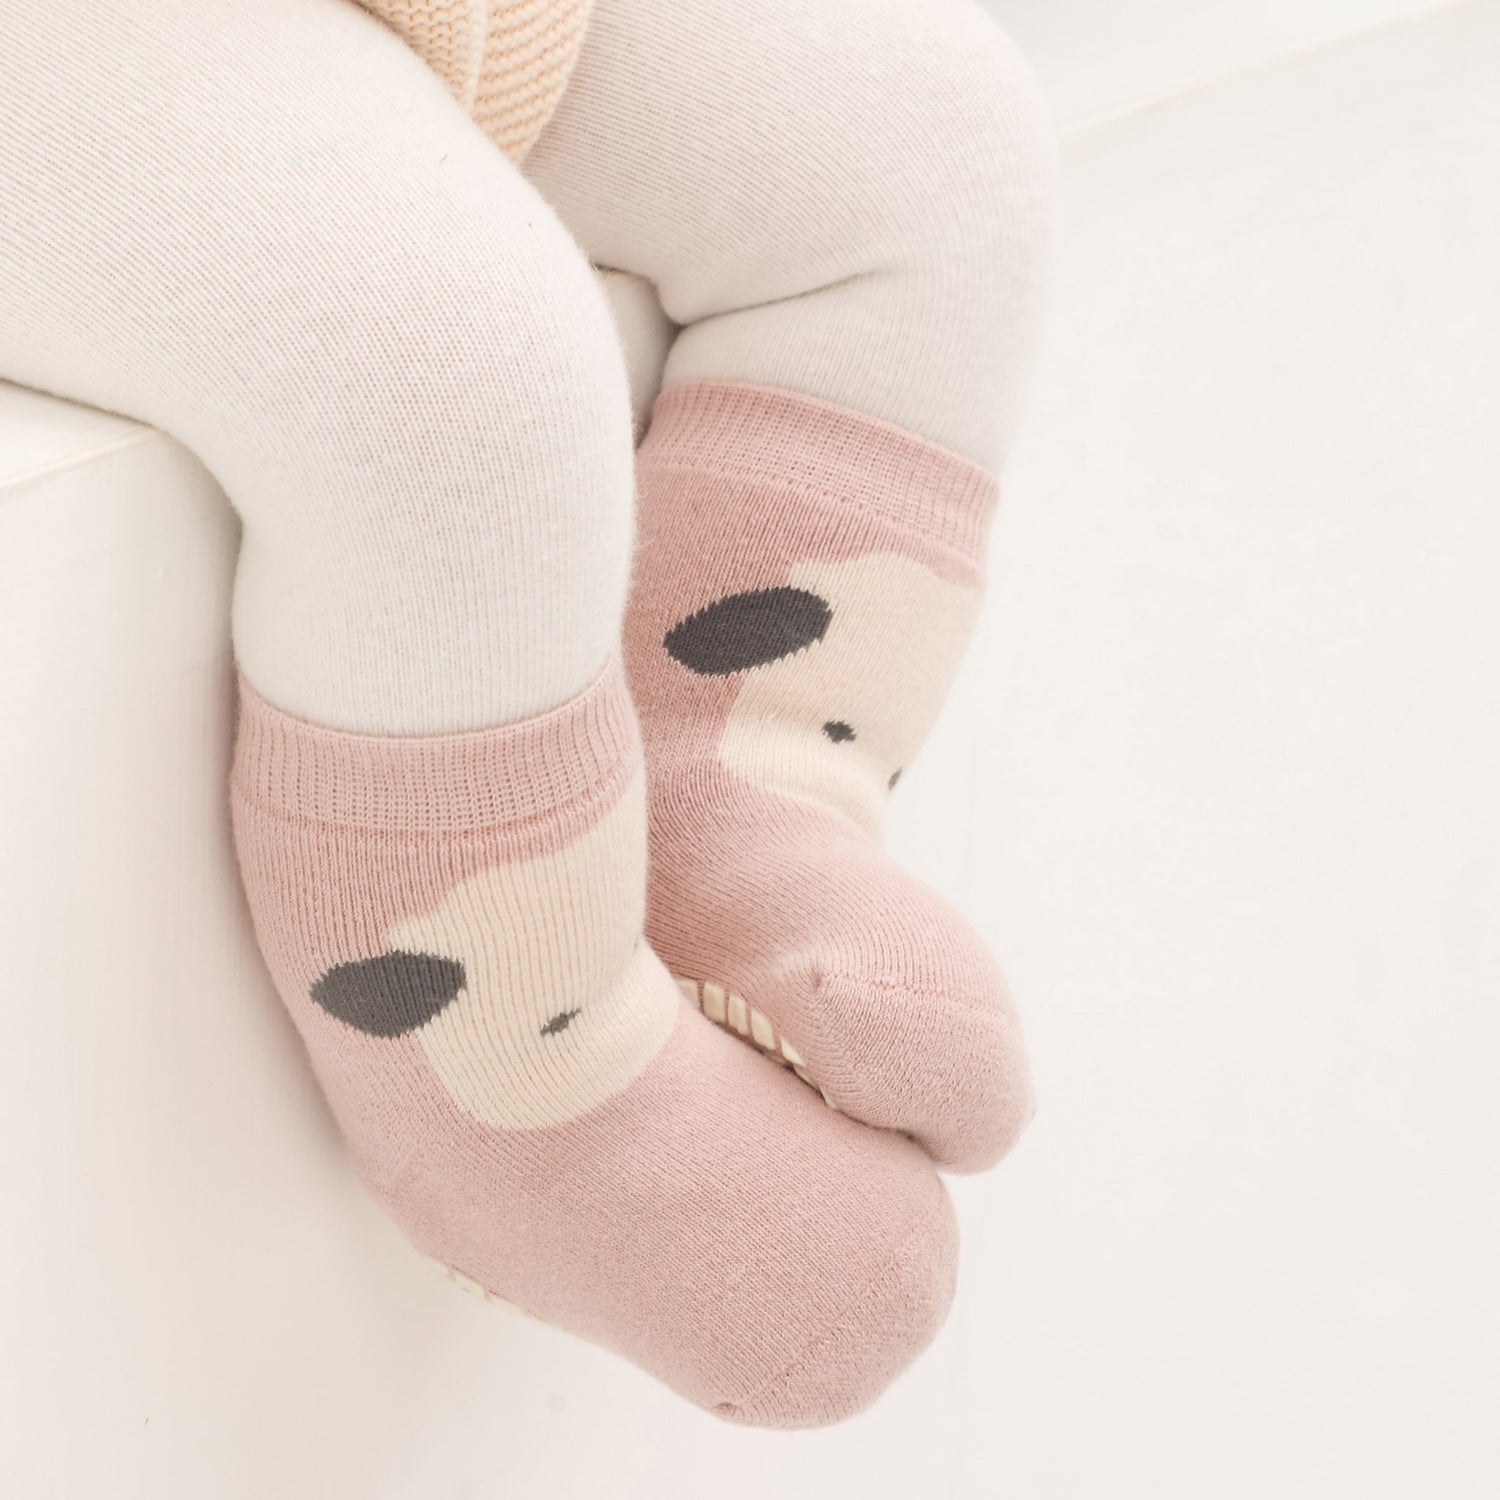 Toddler grip socks with arch support for growing feet